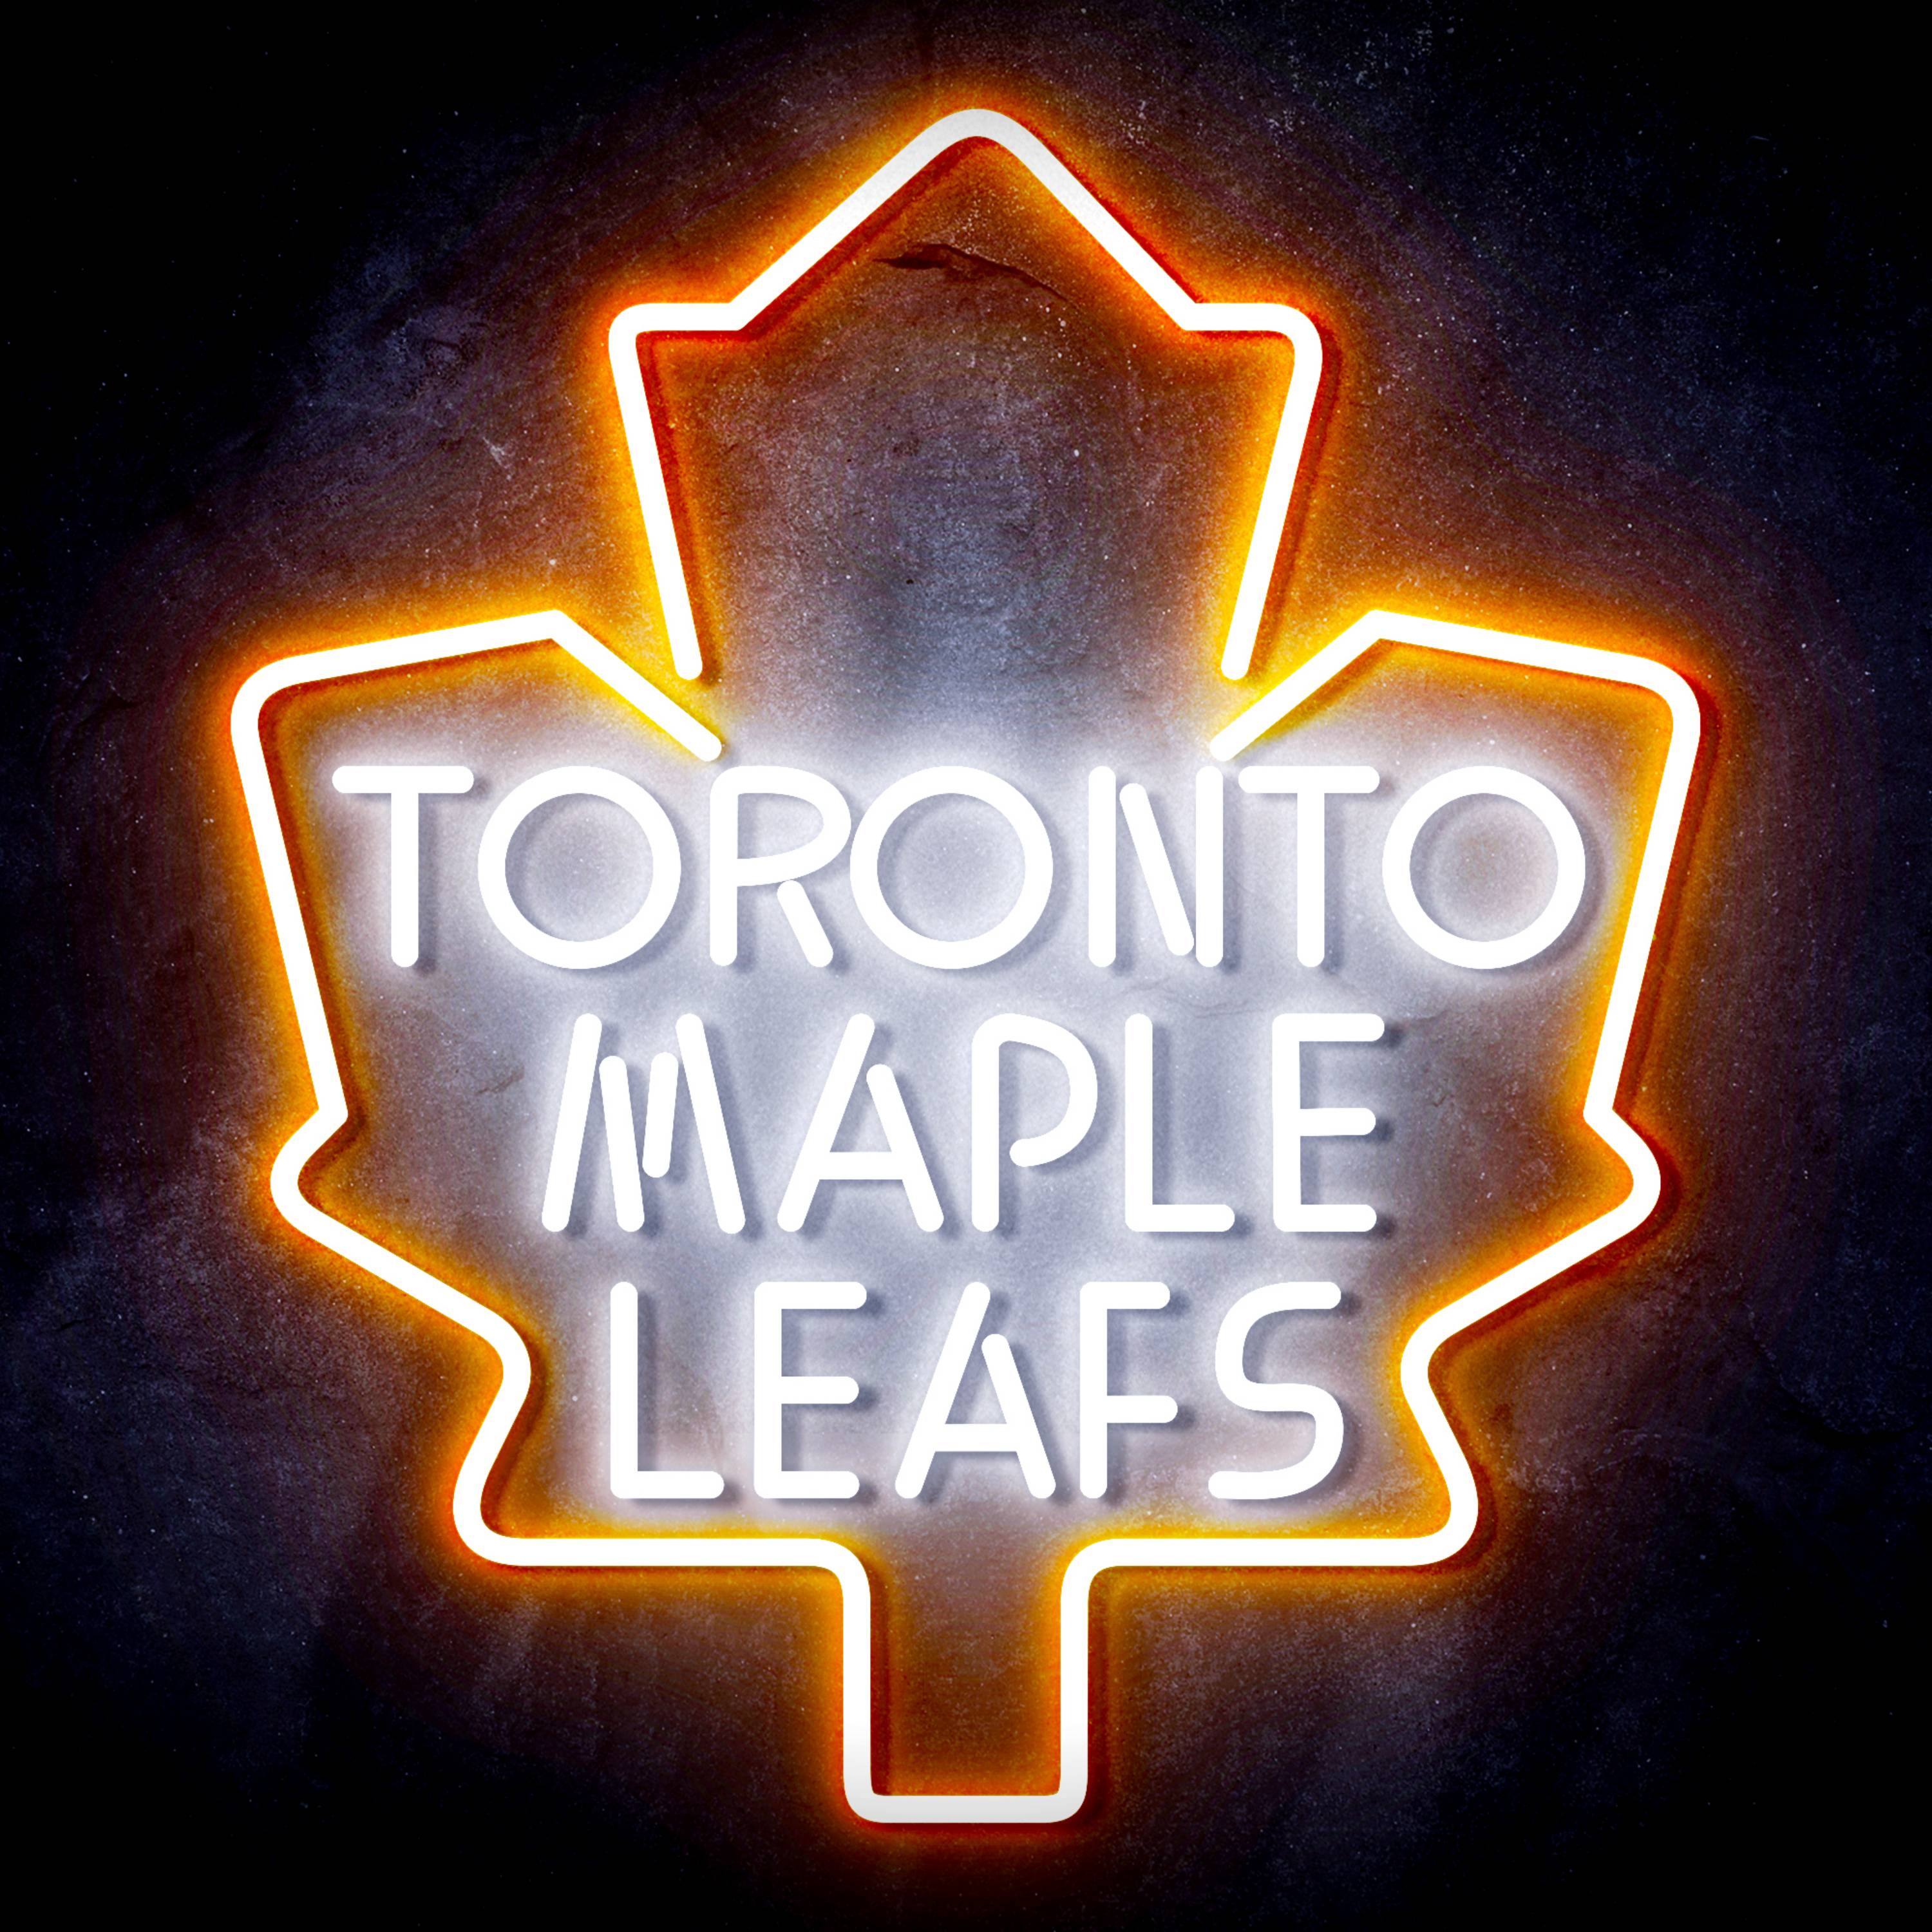 NHL Toronto Maple Leafs LED Neon Sign